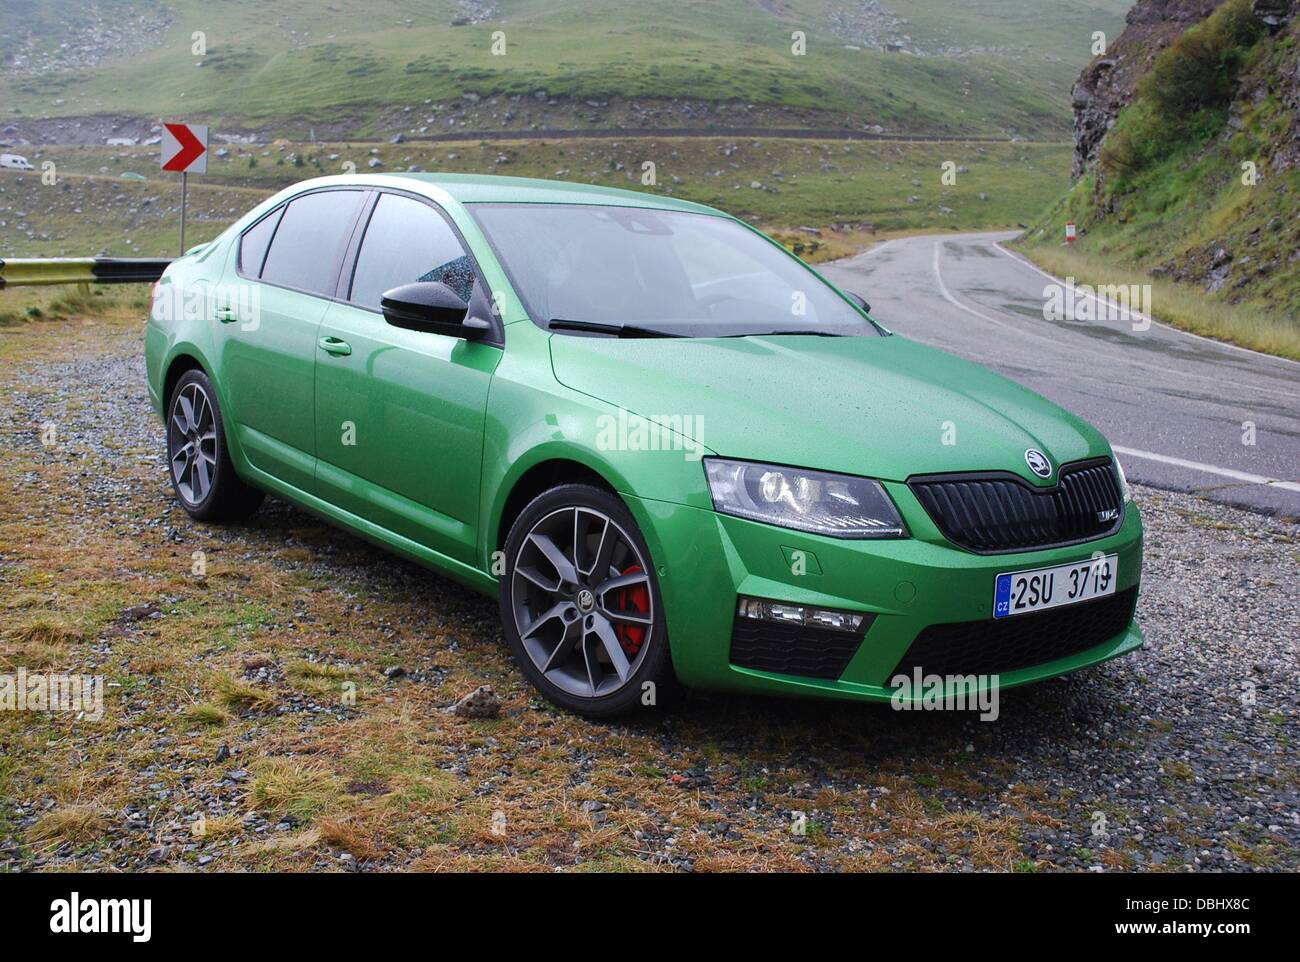 Skoda Octavia RS, one of the fastest and most powerful Octavia model on the  road, was launched in July. Output is 220 hp and top speed is 248 km/h. New  Skoda Octavia